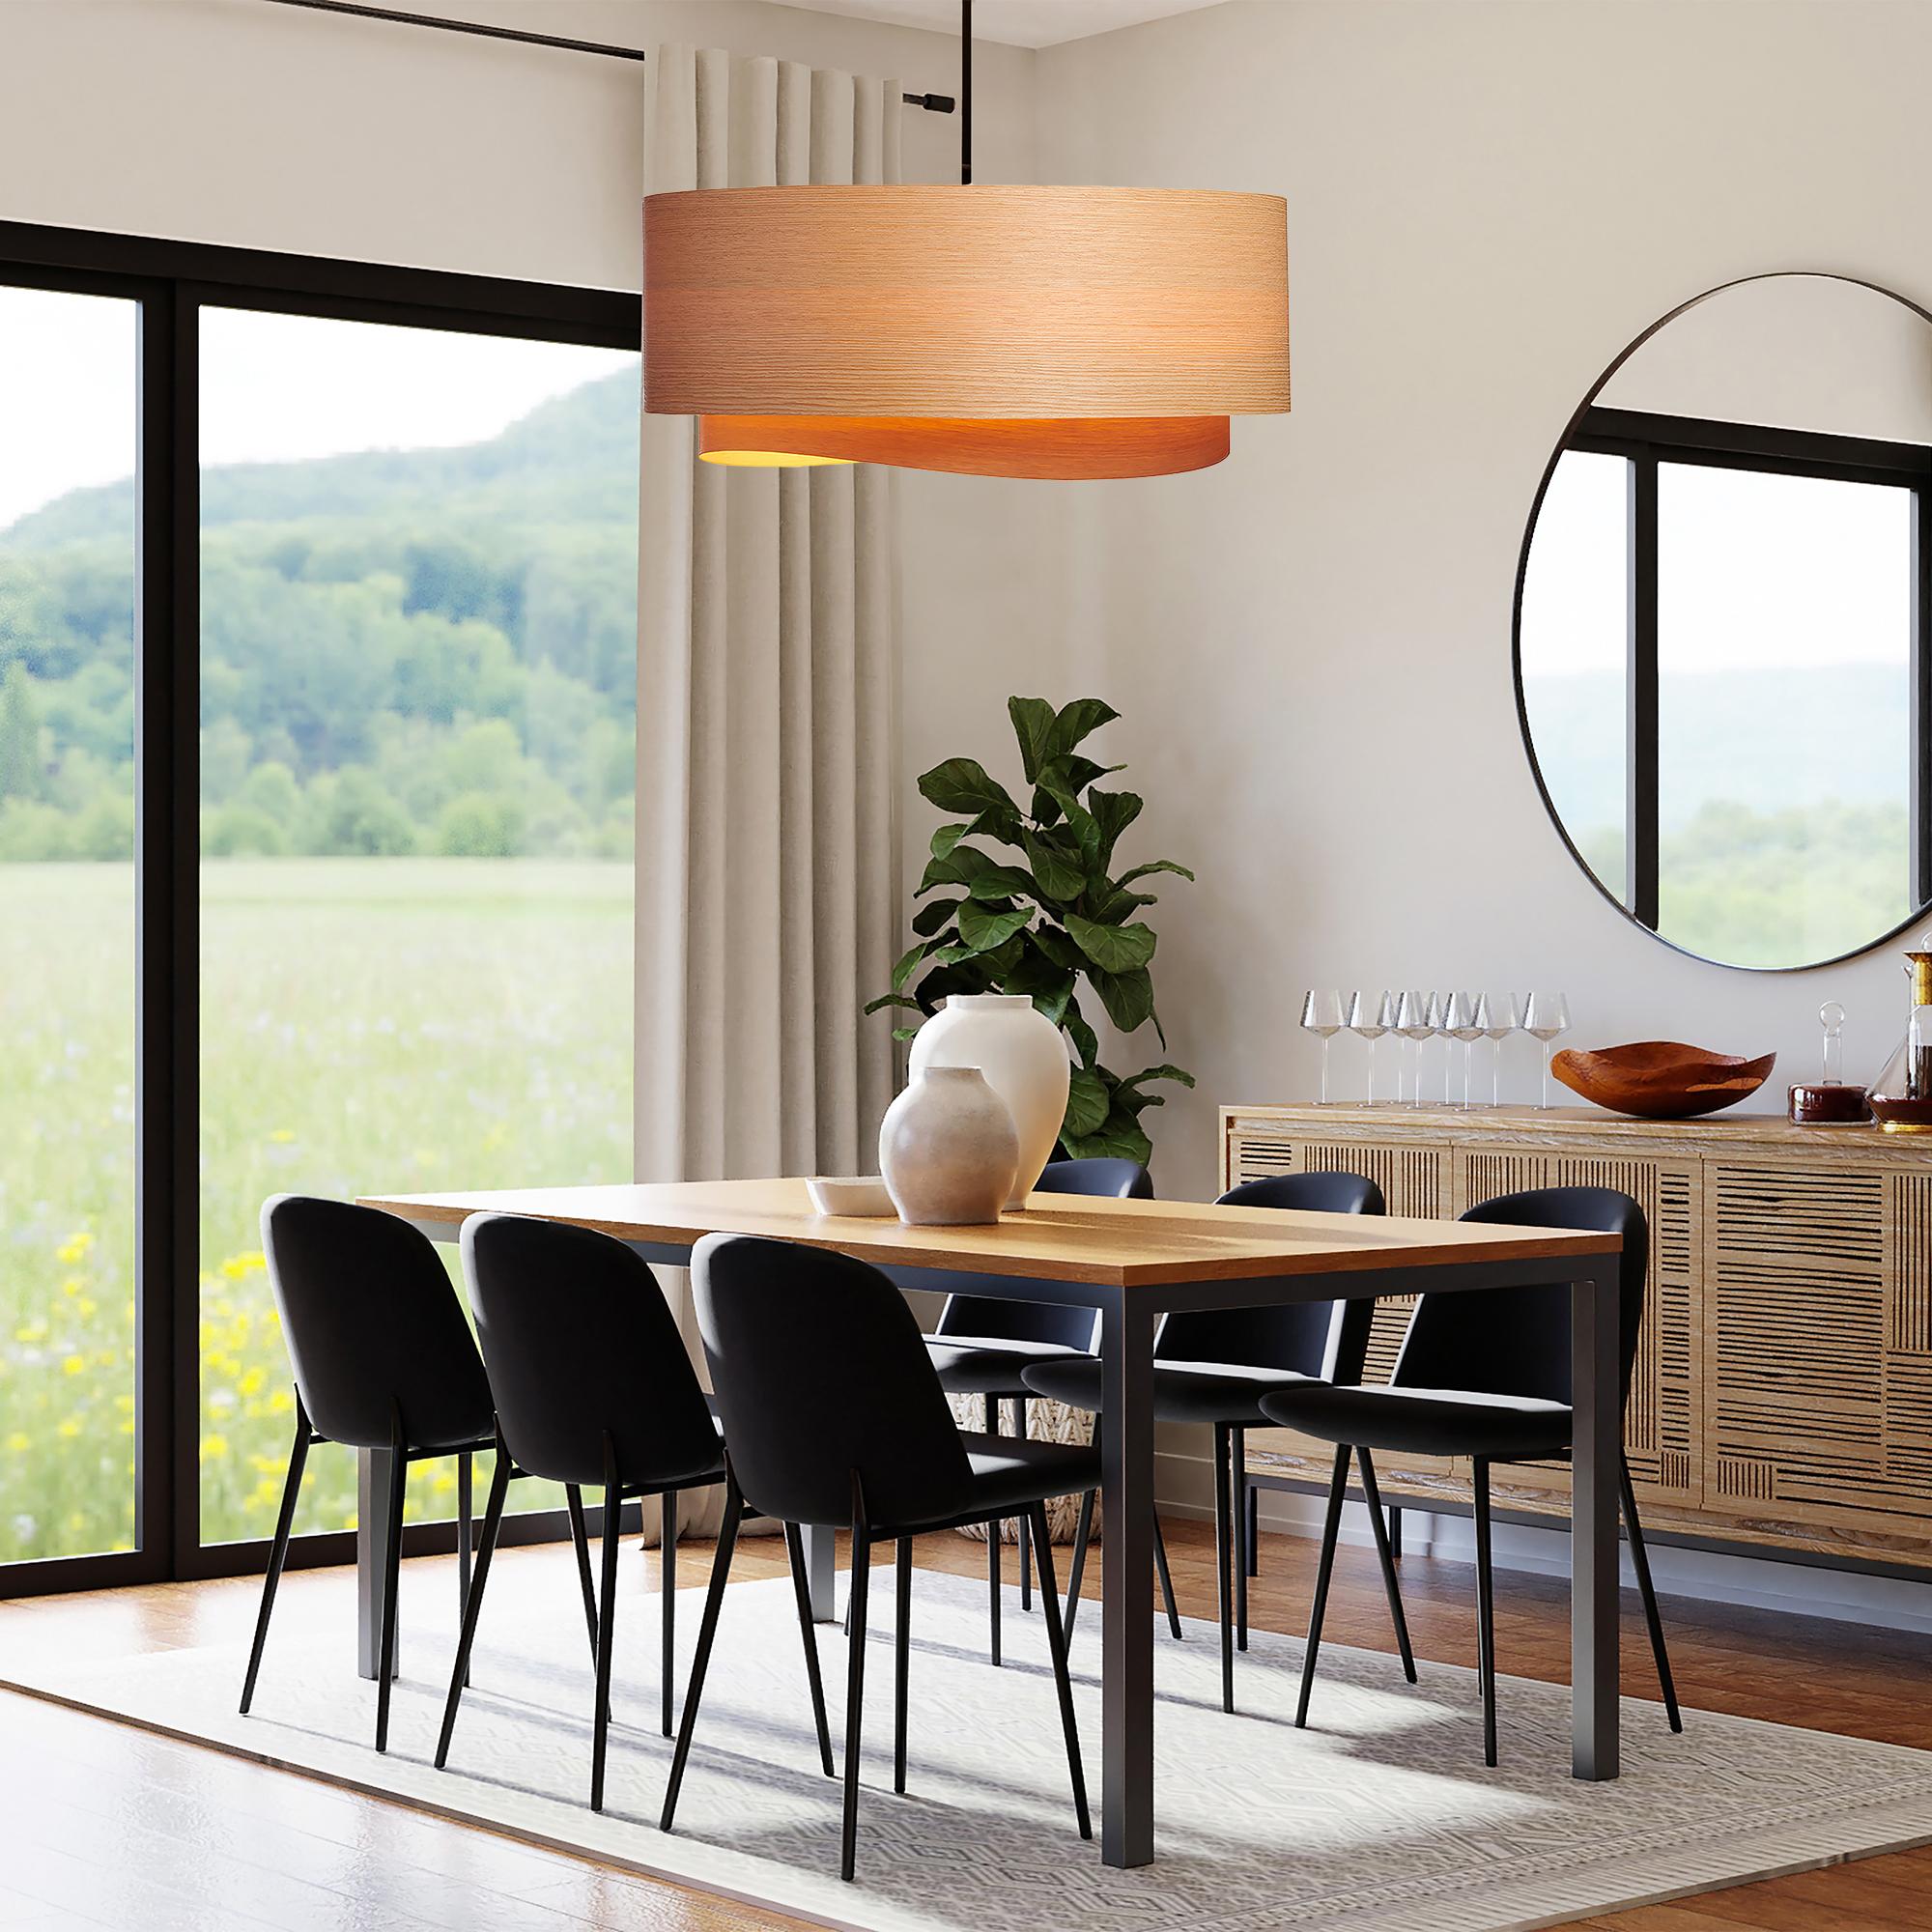 The Half BOWEN pendant light is a stunning, contemporary Mid-Century Modern light fixture with a Scandinavian composition and natural wood veneer construction. This minimalist luxury chandelier pendant design is the perfect way to add a touch of